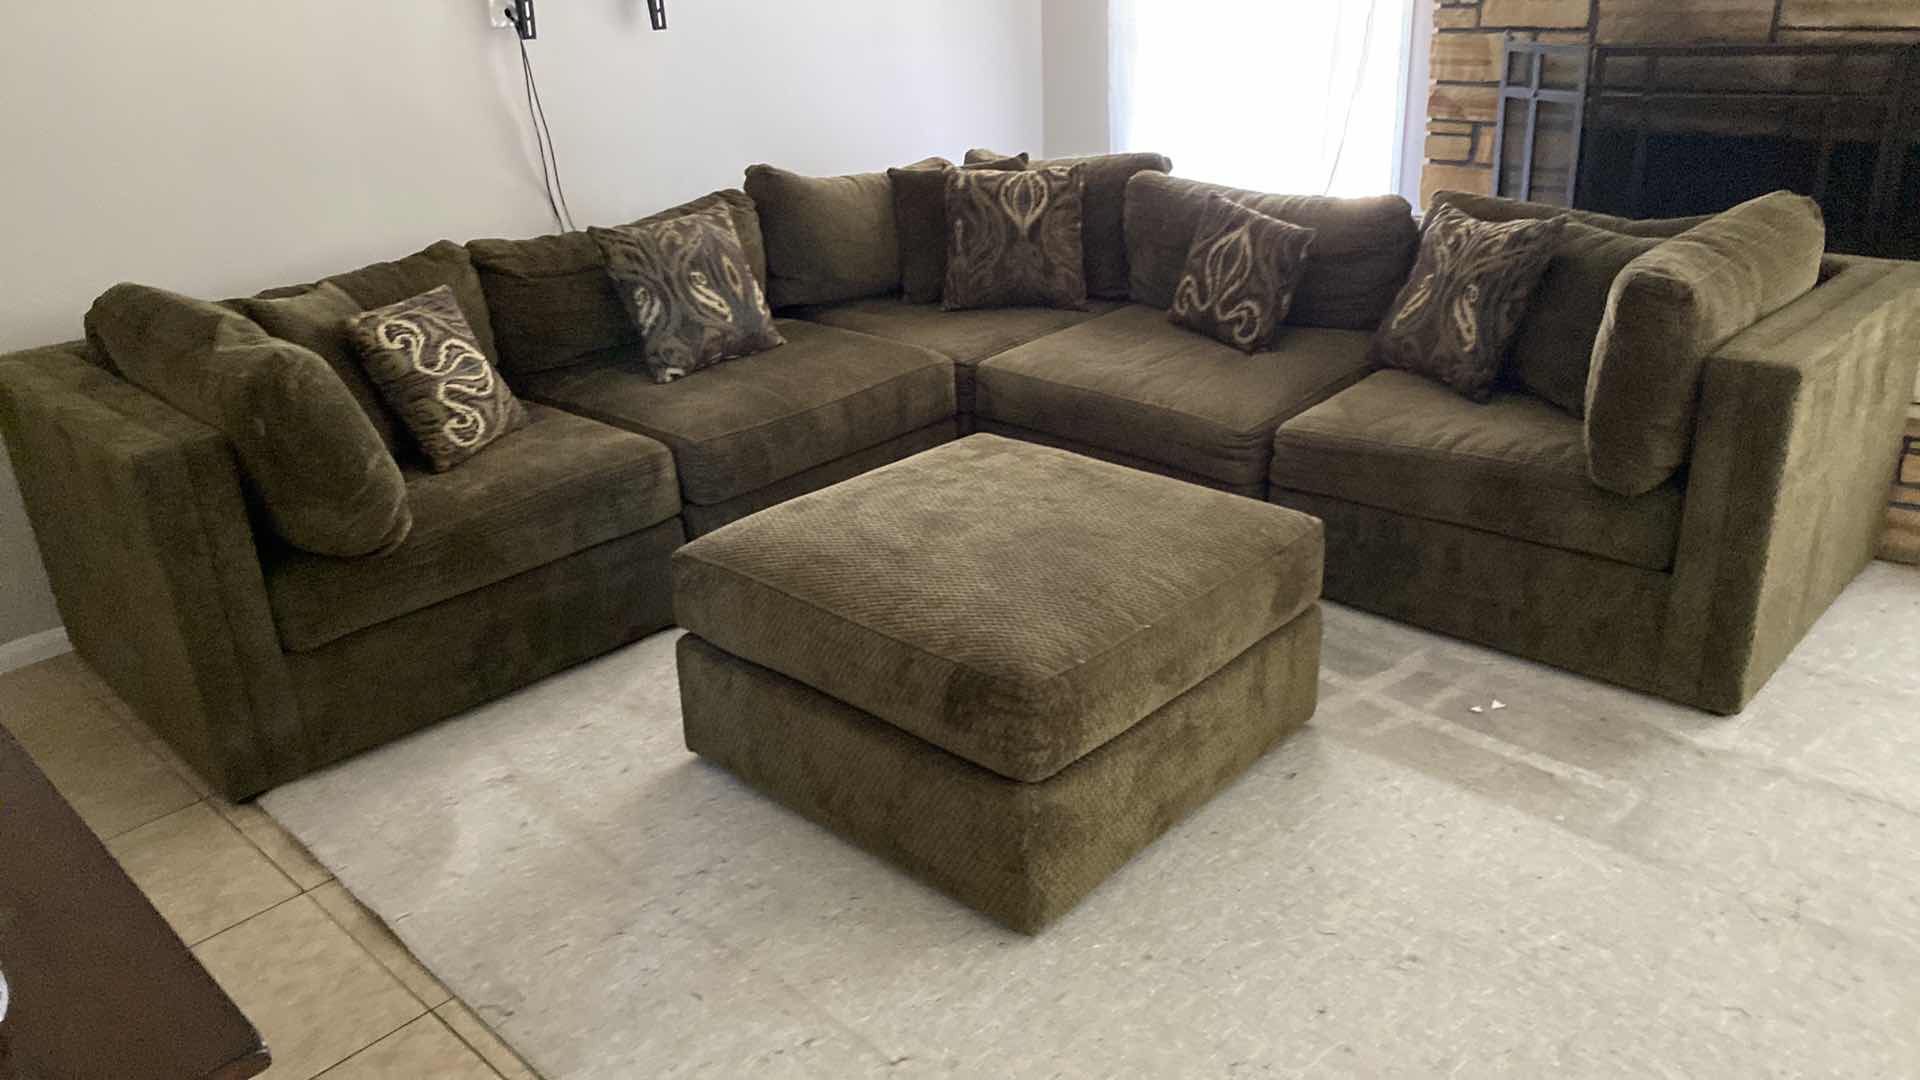 Photo 5 of 10‘ x 10‘ SECTIONAL OLIVE GREEN FABRIC SOFA AND OTTOMAN 3‘ x 3‘